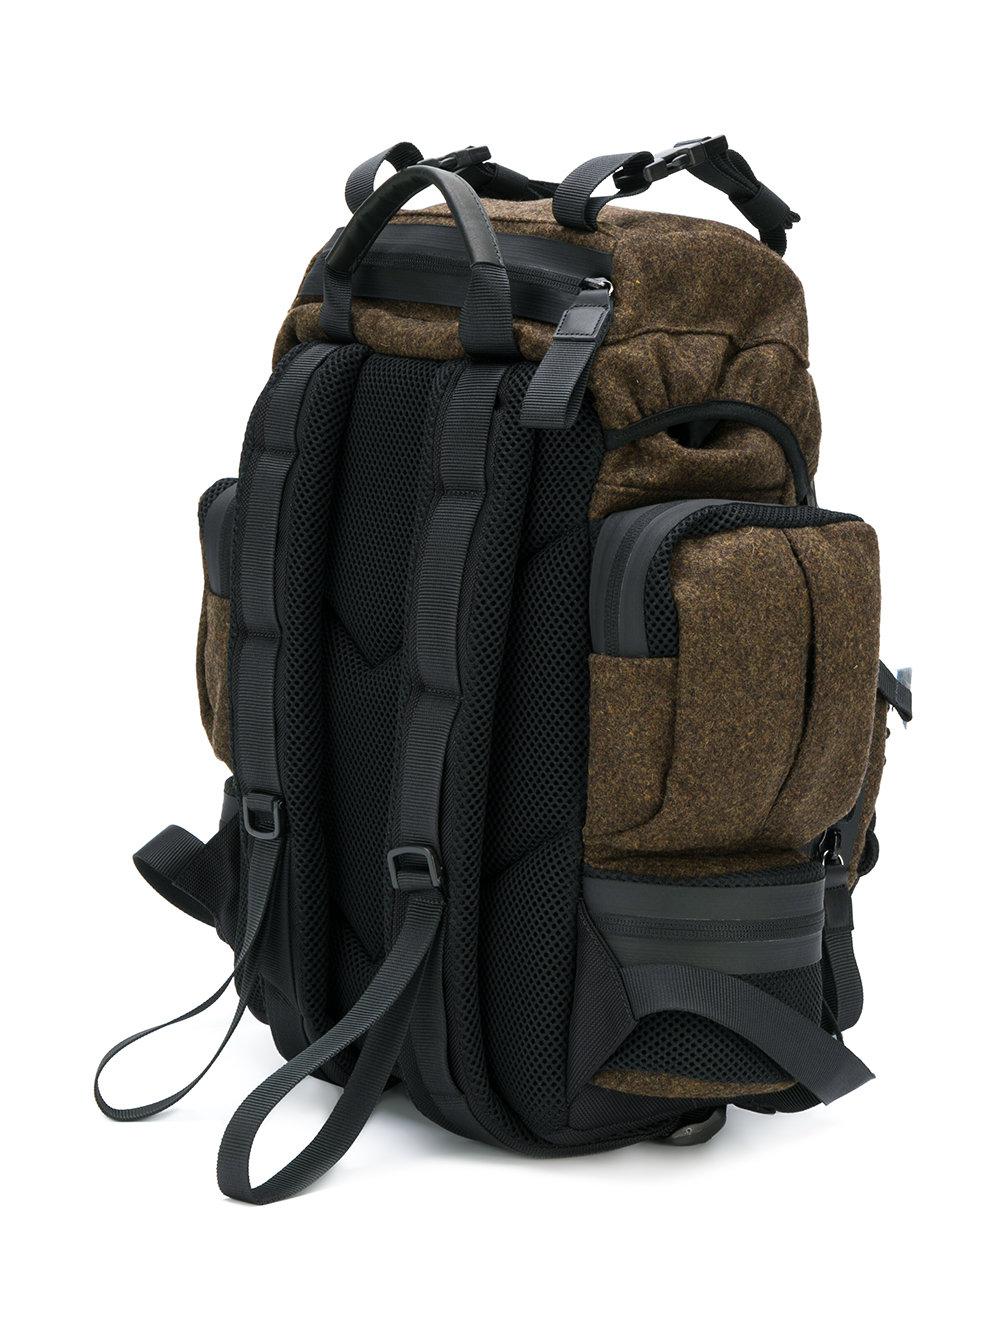 Lyst - DSquared² Multi-compartment Backpack in Brown for Men